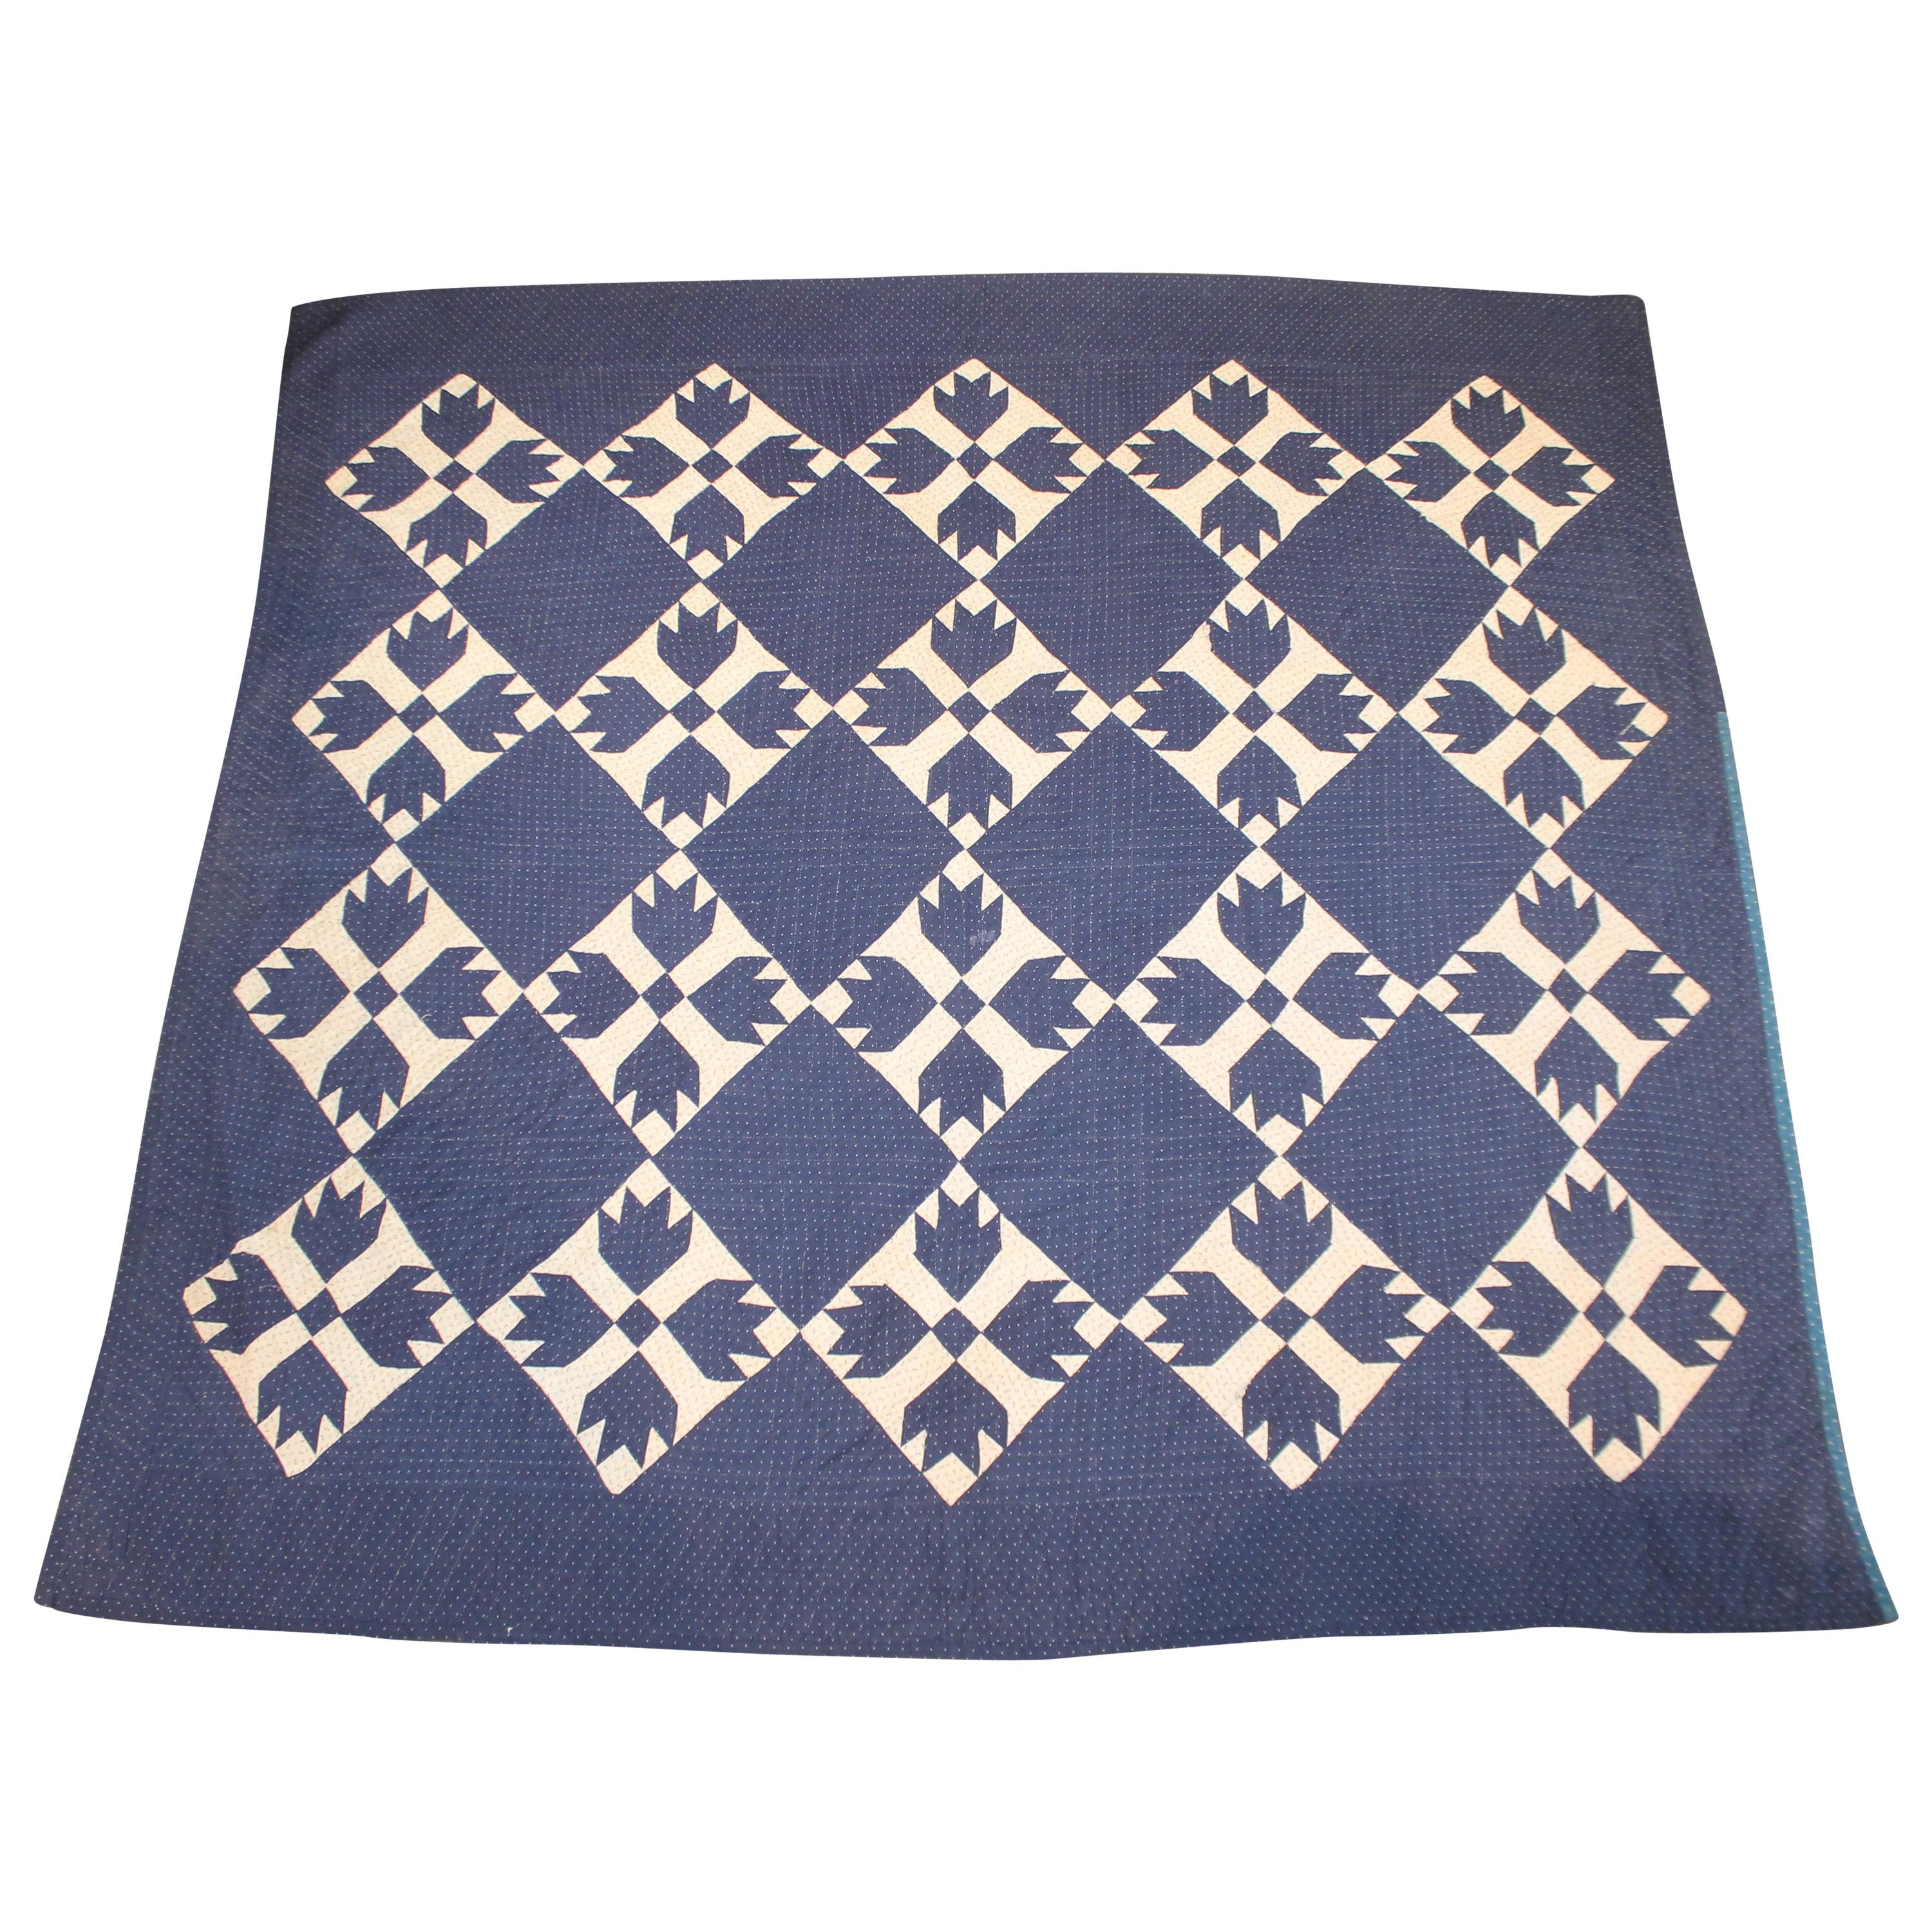 Antique Indigo Blue Quilt in Bear Paw Pattern For Sale